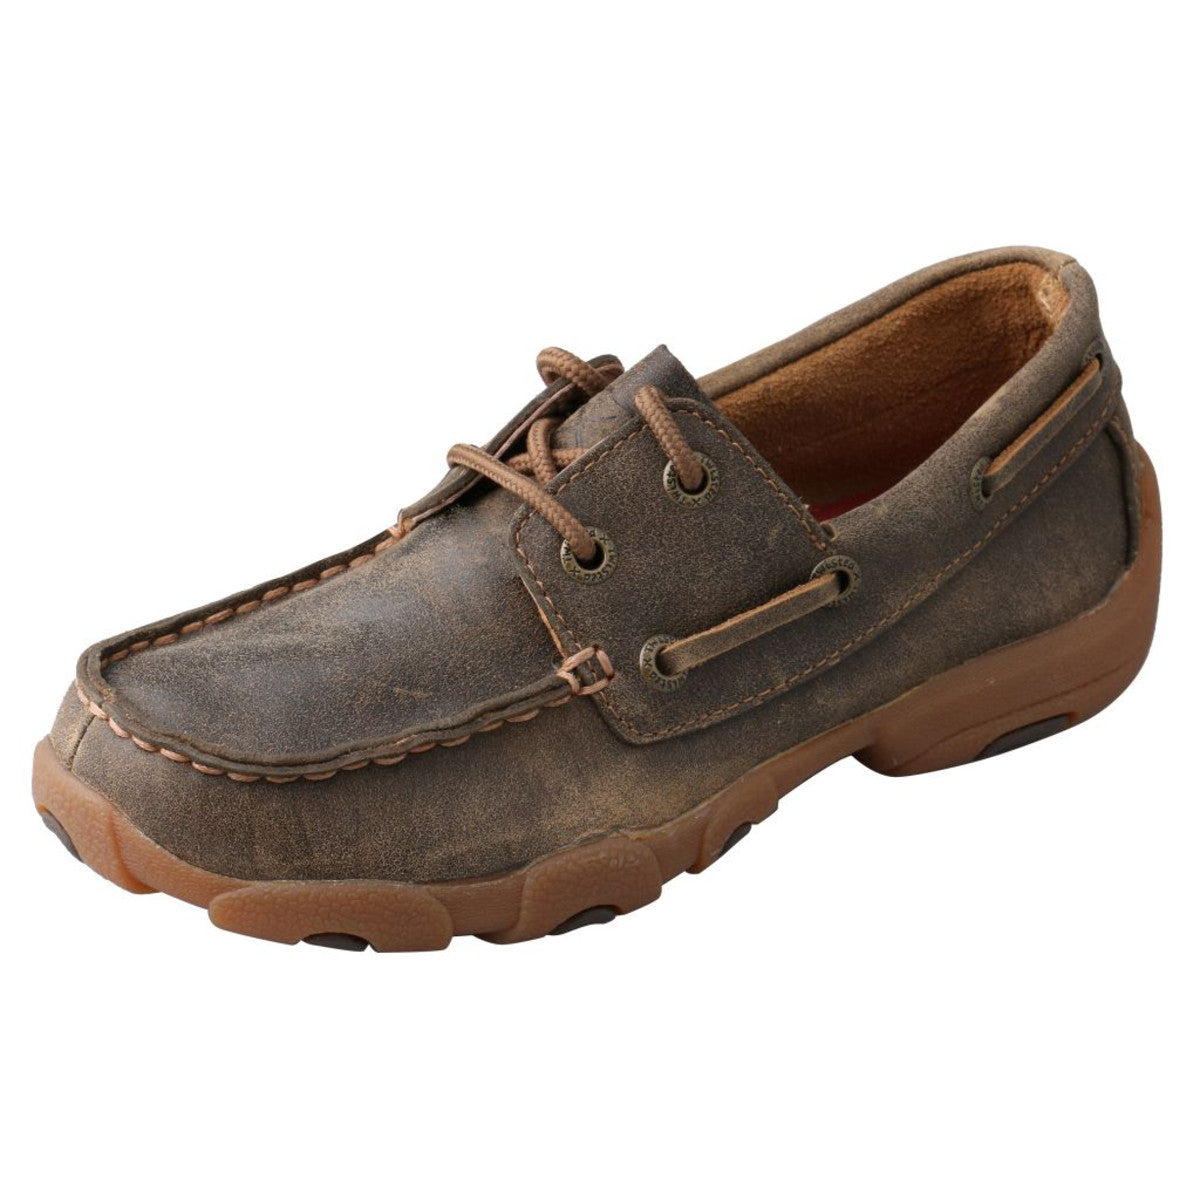 Kids' Twisted X Boat Shoe Driving Moccasins in Bomber/Bomber from the side view